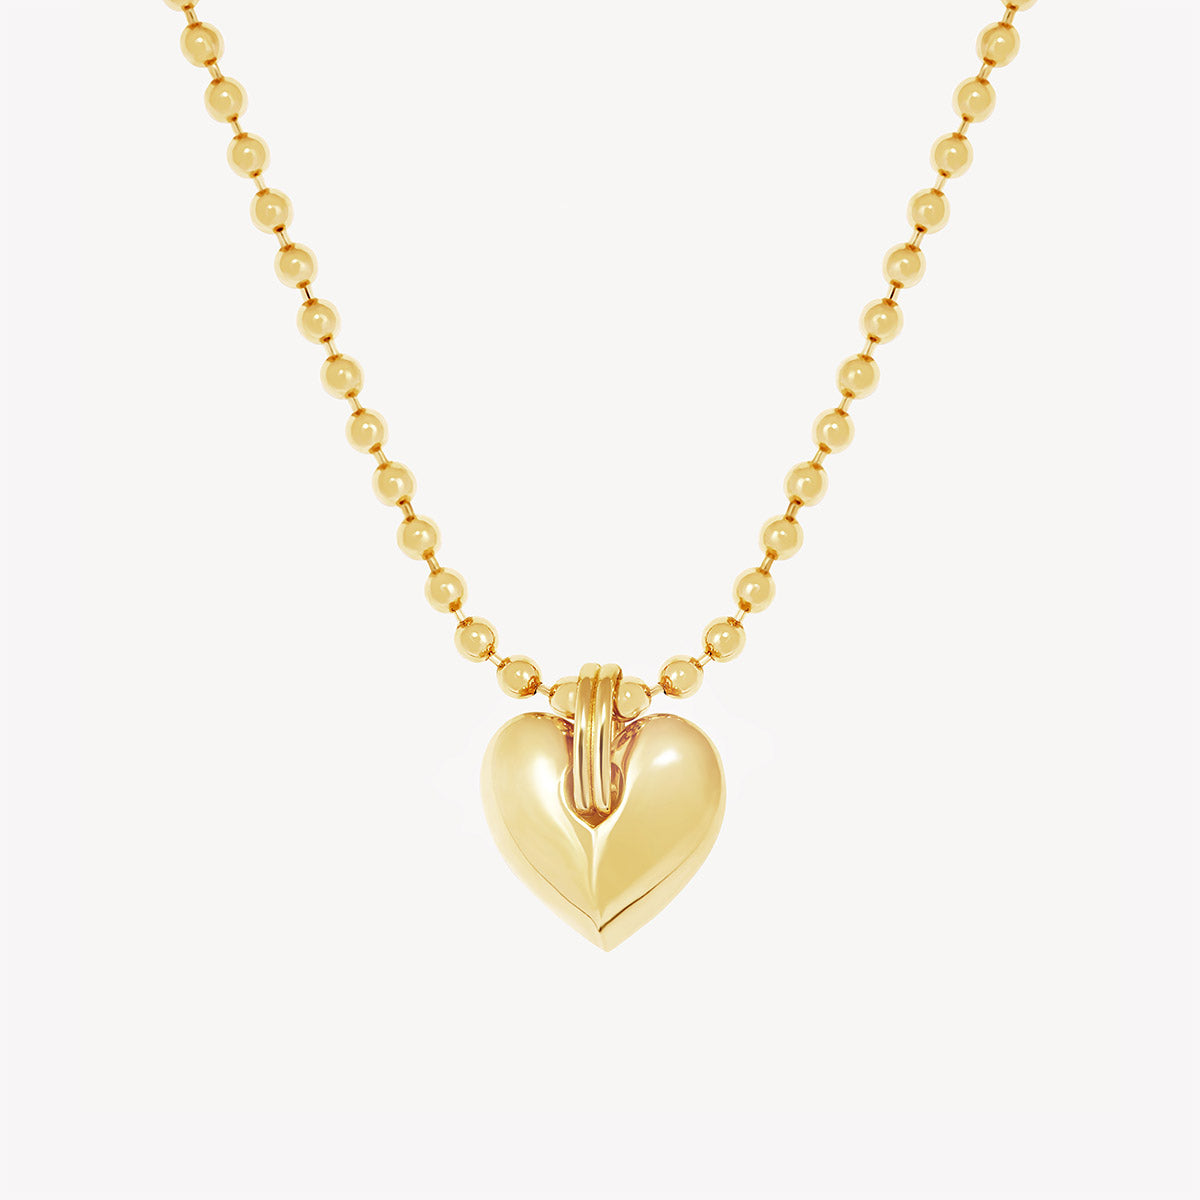 1" heart pendant on a ball chain in gold plate